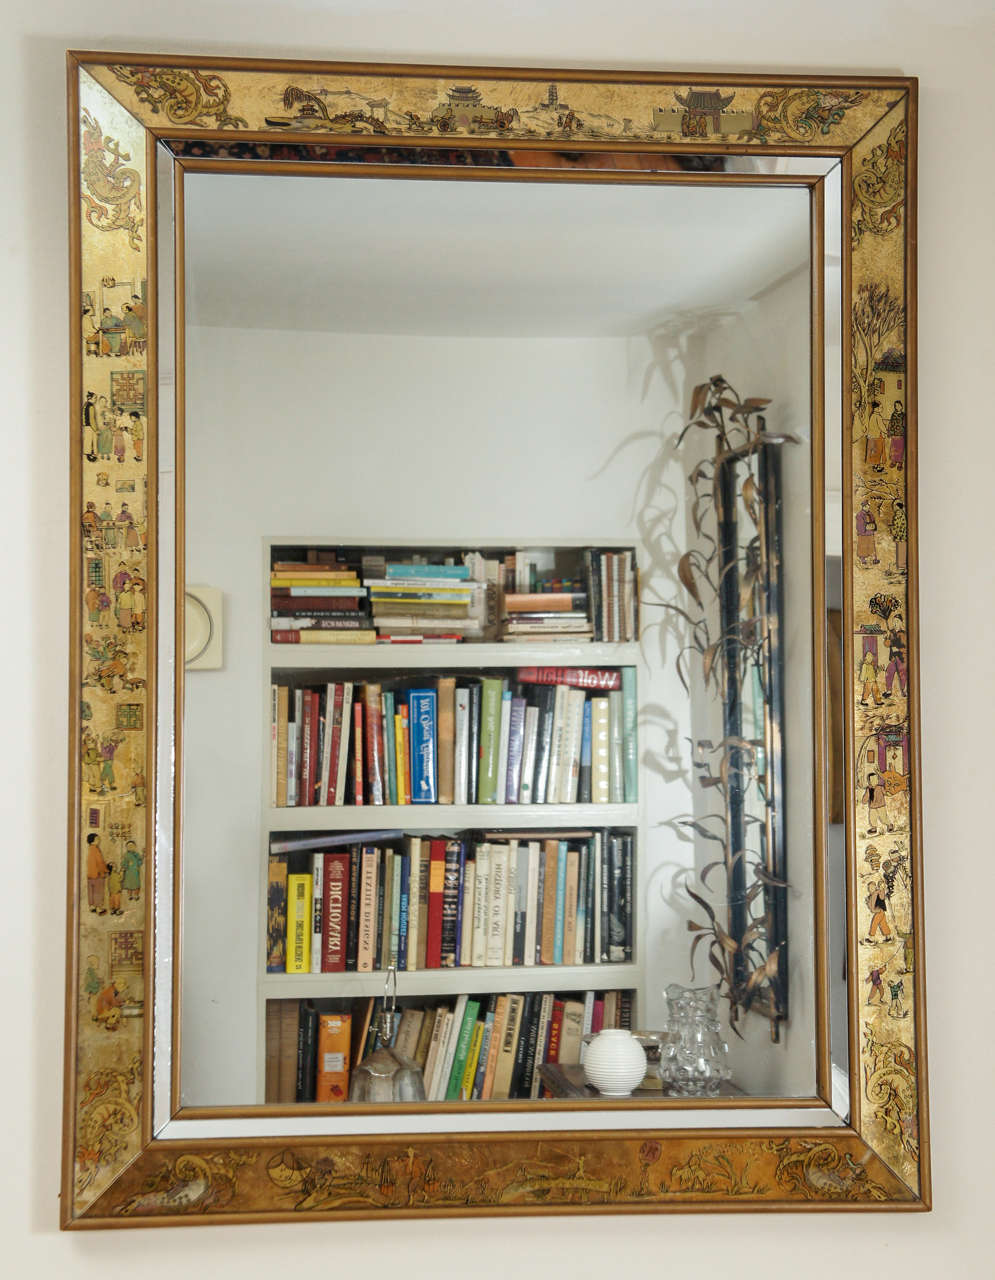 This large mirror is bordered by a beveled panel of painted chinese figures.
Dragons, Happy Families, Laborers and Domestic scenes.